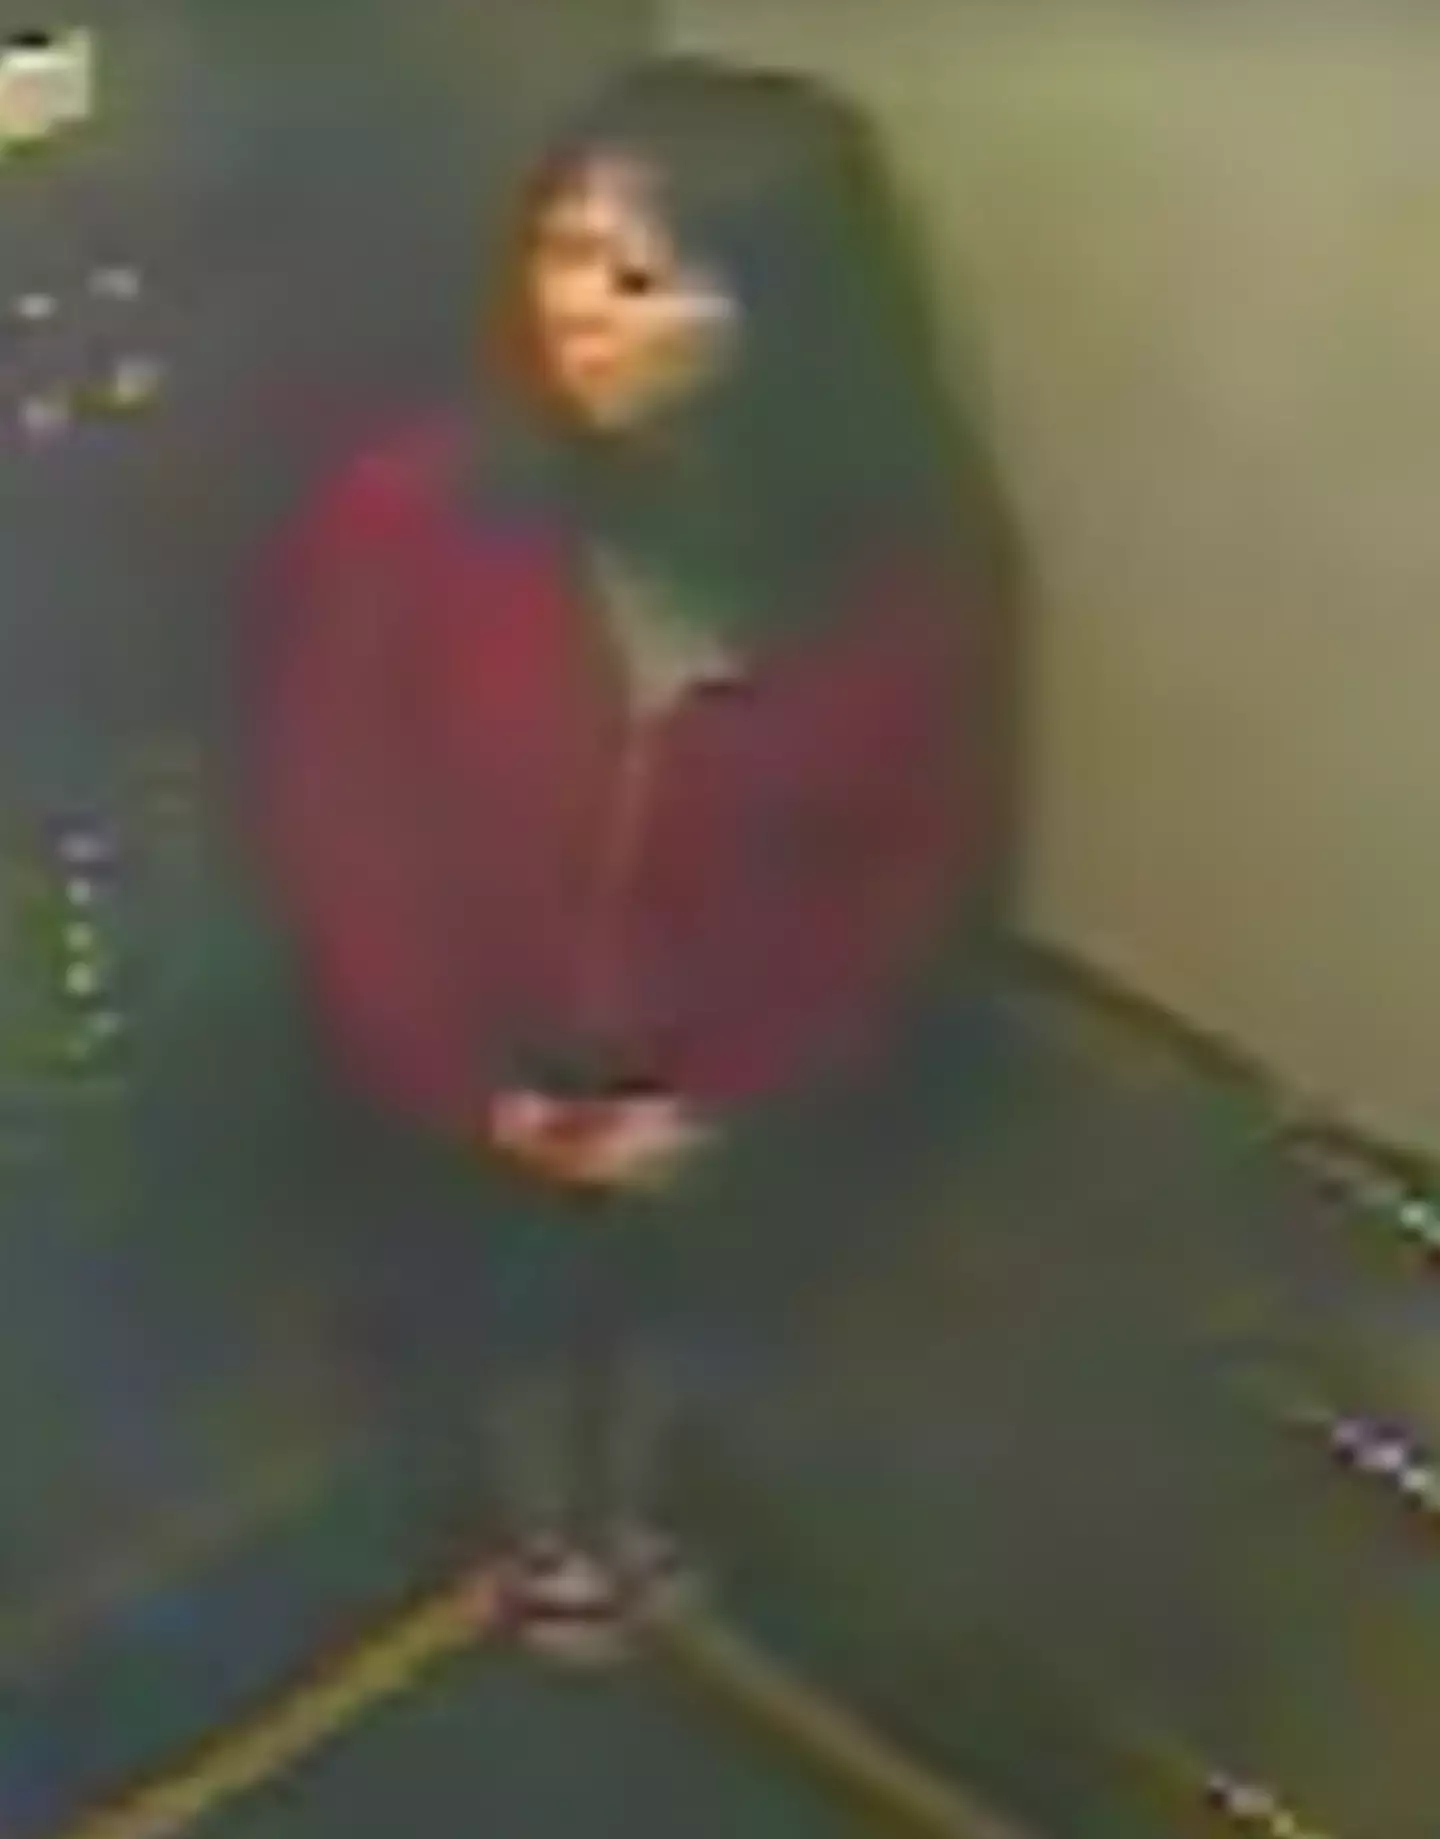 CCTV footage before her disappearance appears to show Elisa talking to someone in the elevator before odd behaviour. (Netflix)